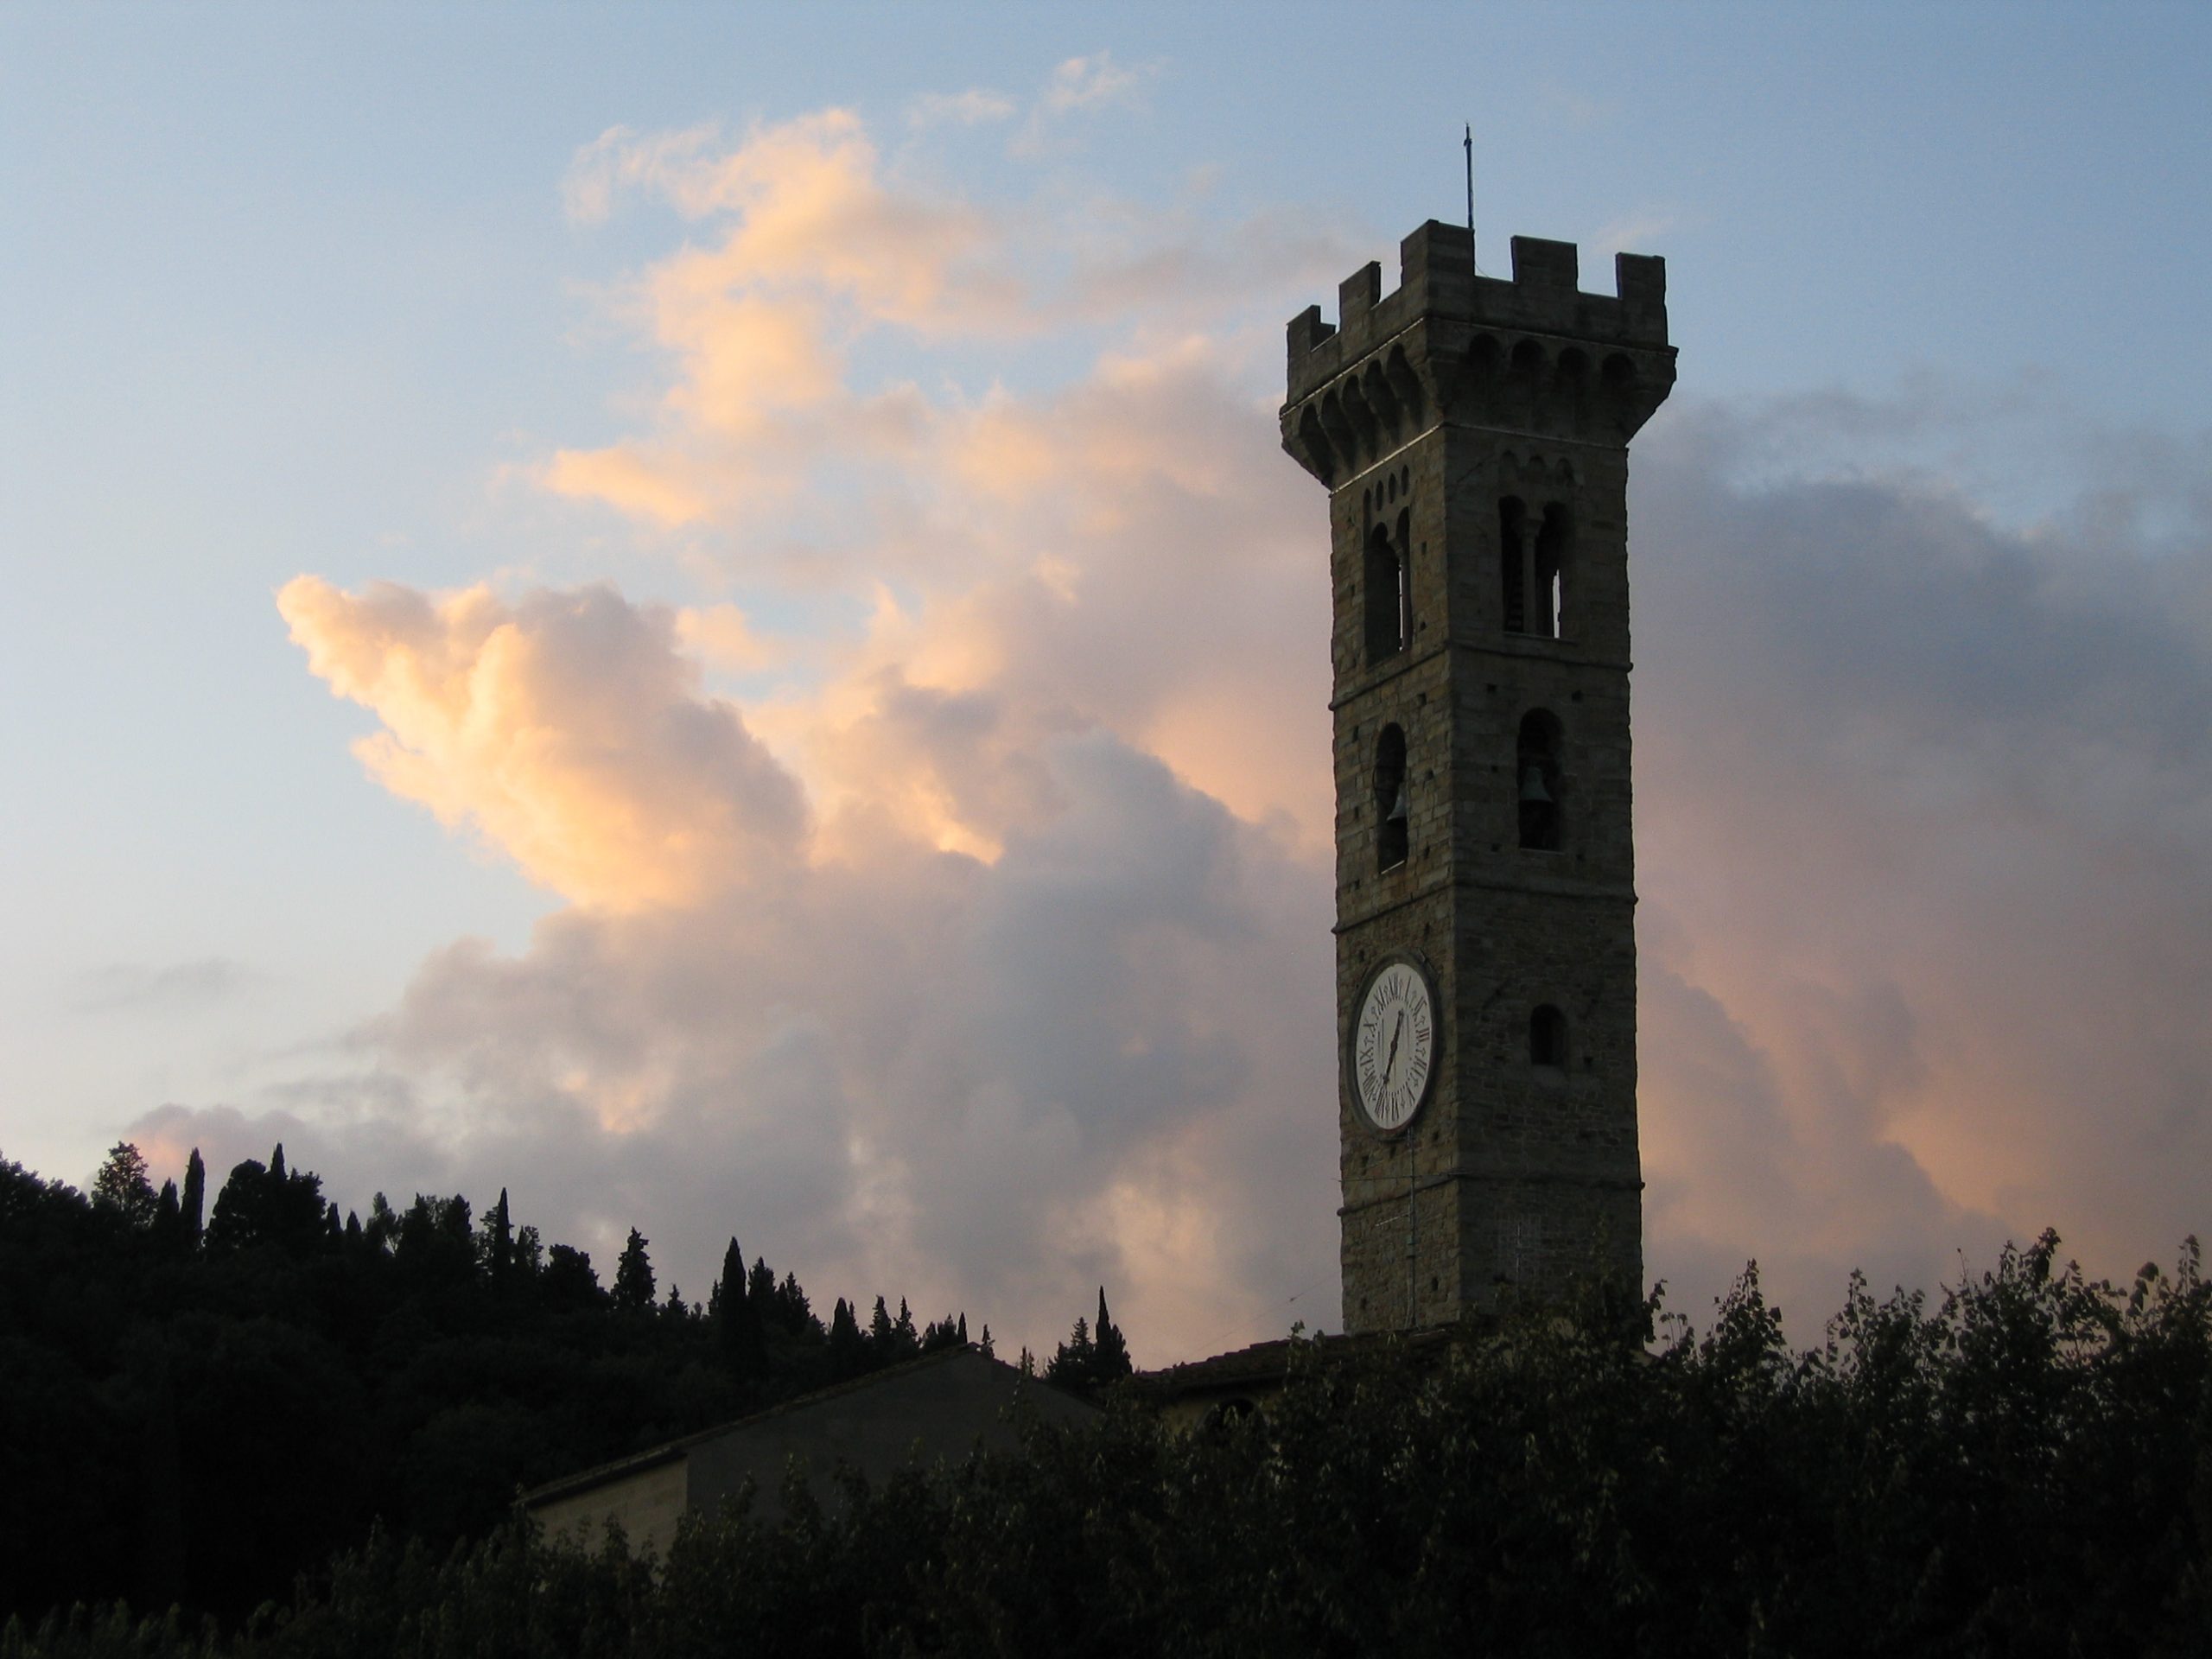 The cathedral's bell tower in Fiesole